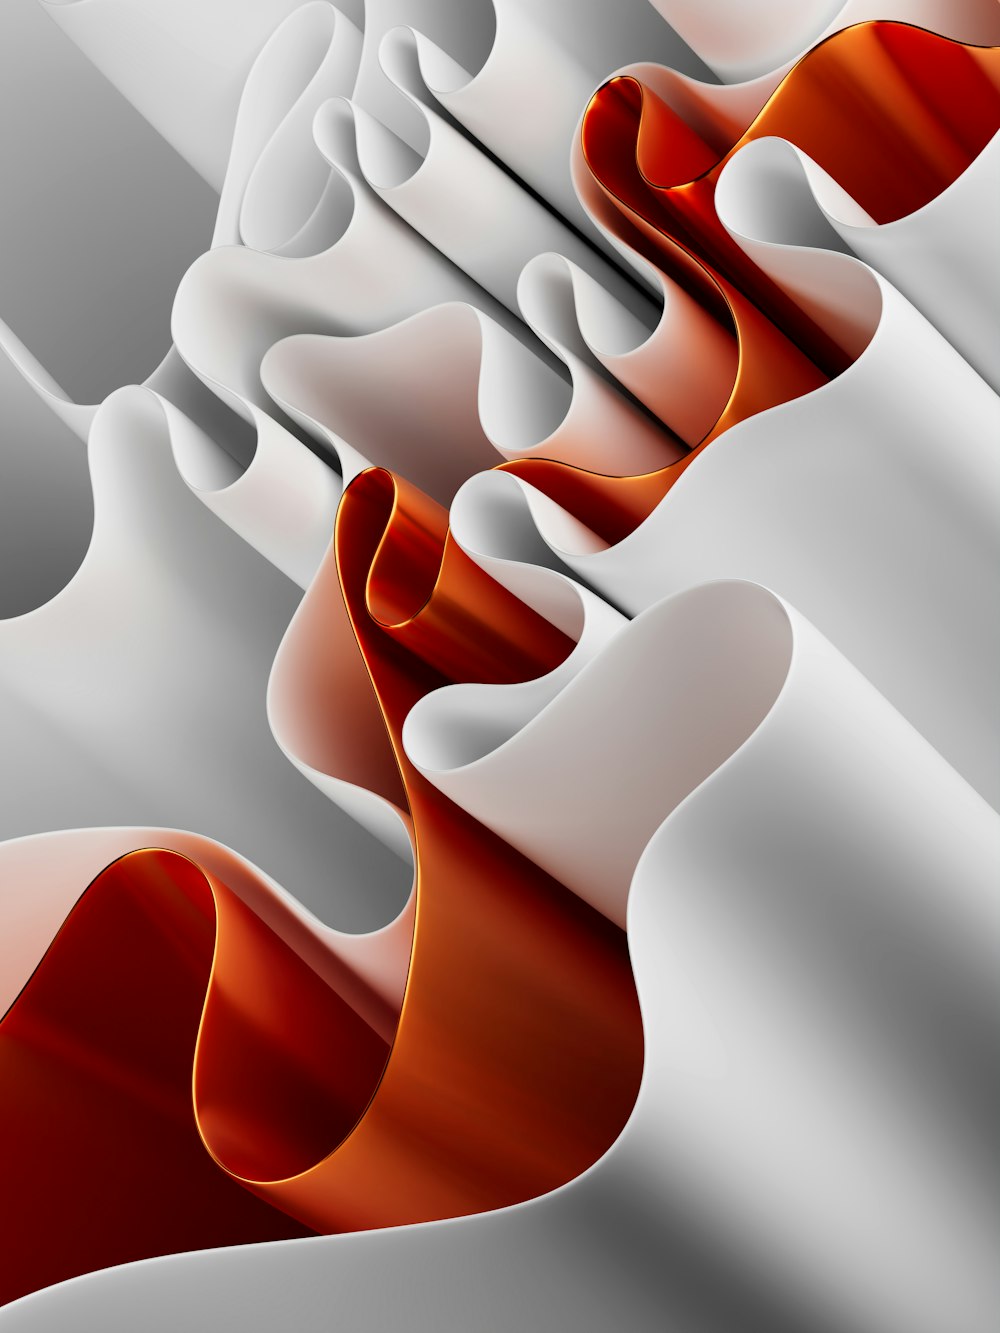 a computer generated image of red and white shapes